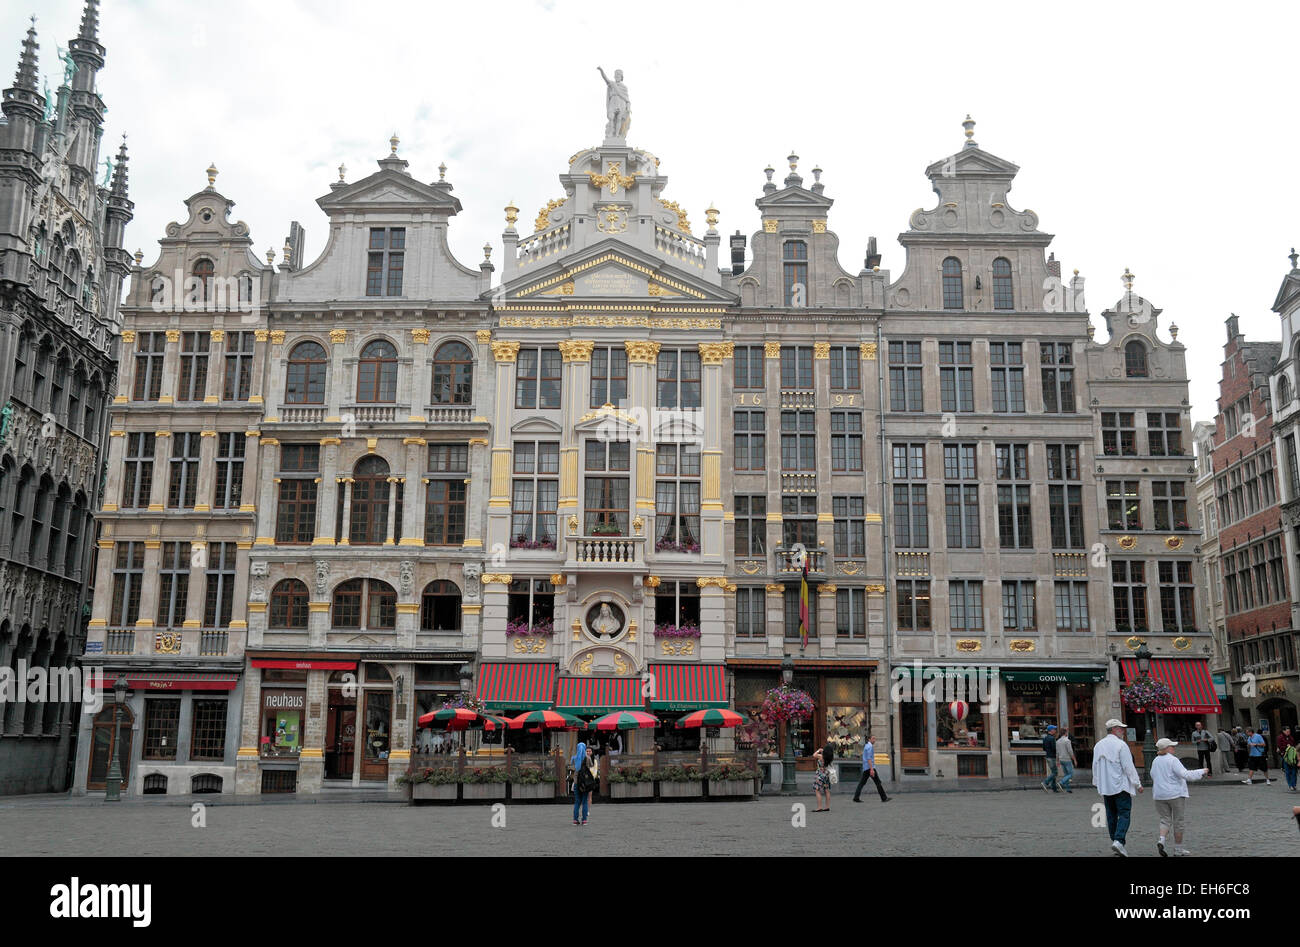 View of the north east area of Grand Place (Grote Markt) including the  La Chaloupe d'or restaurant, Brussels, Belgium. Stock Photo